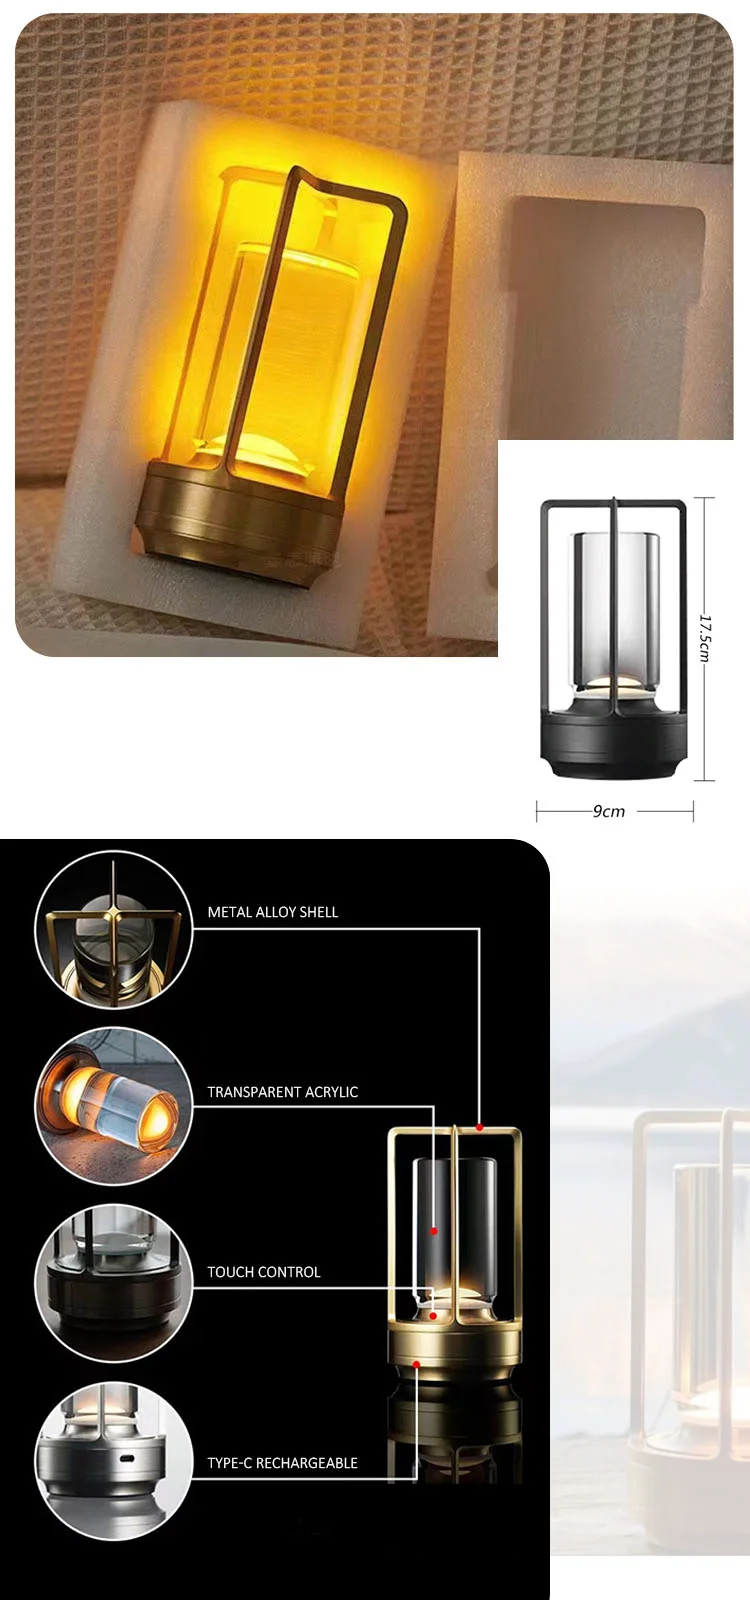 Portable and rechargeable Lumisom Crystal Lamp with 18 hours of cordless illumination